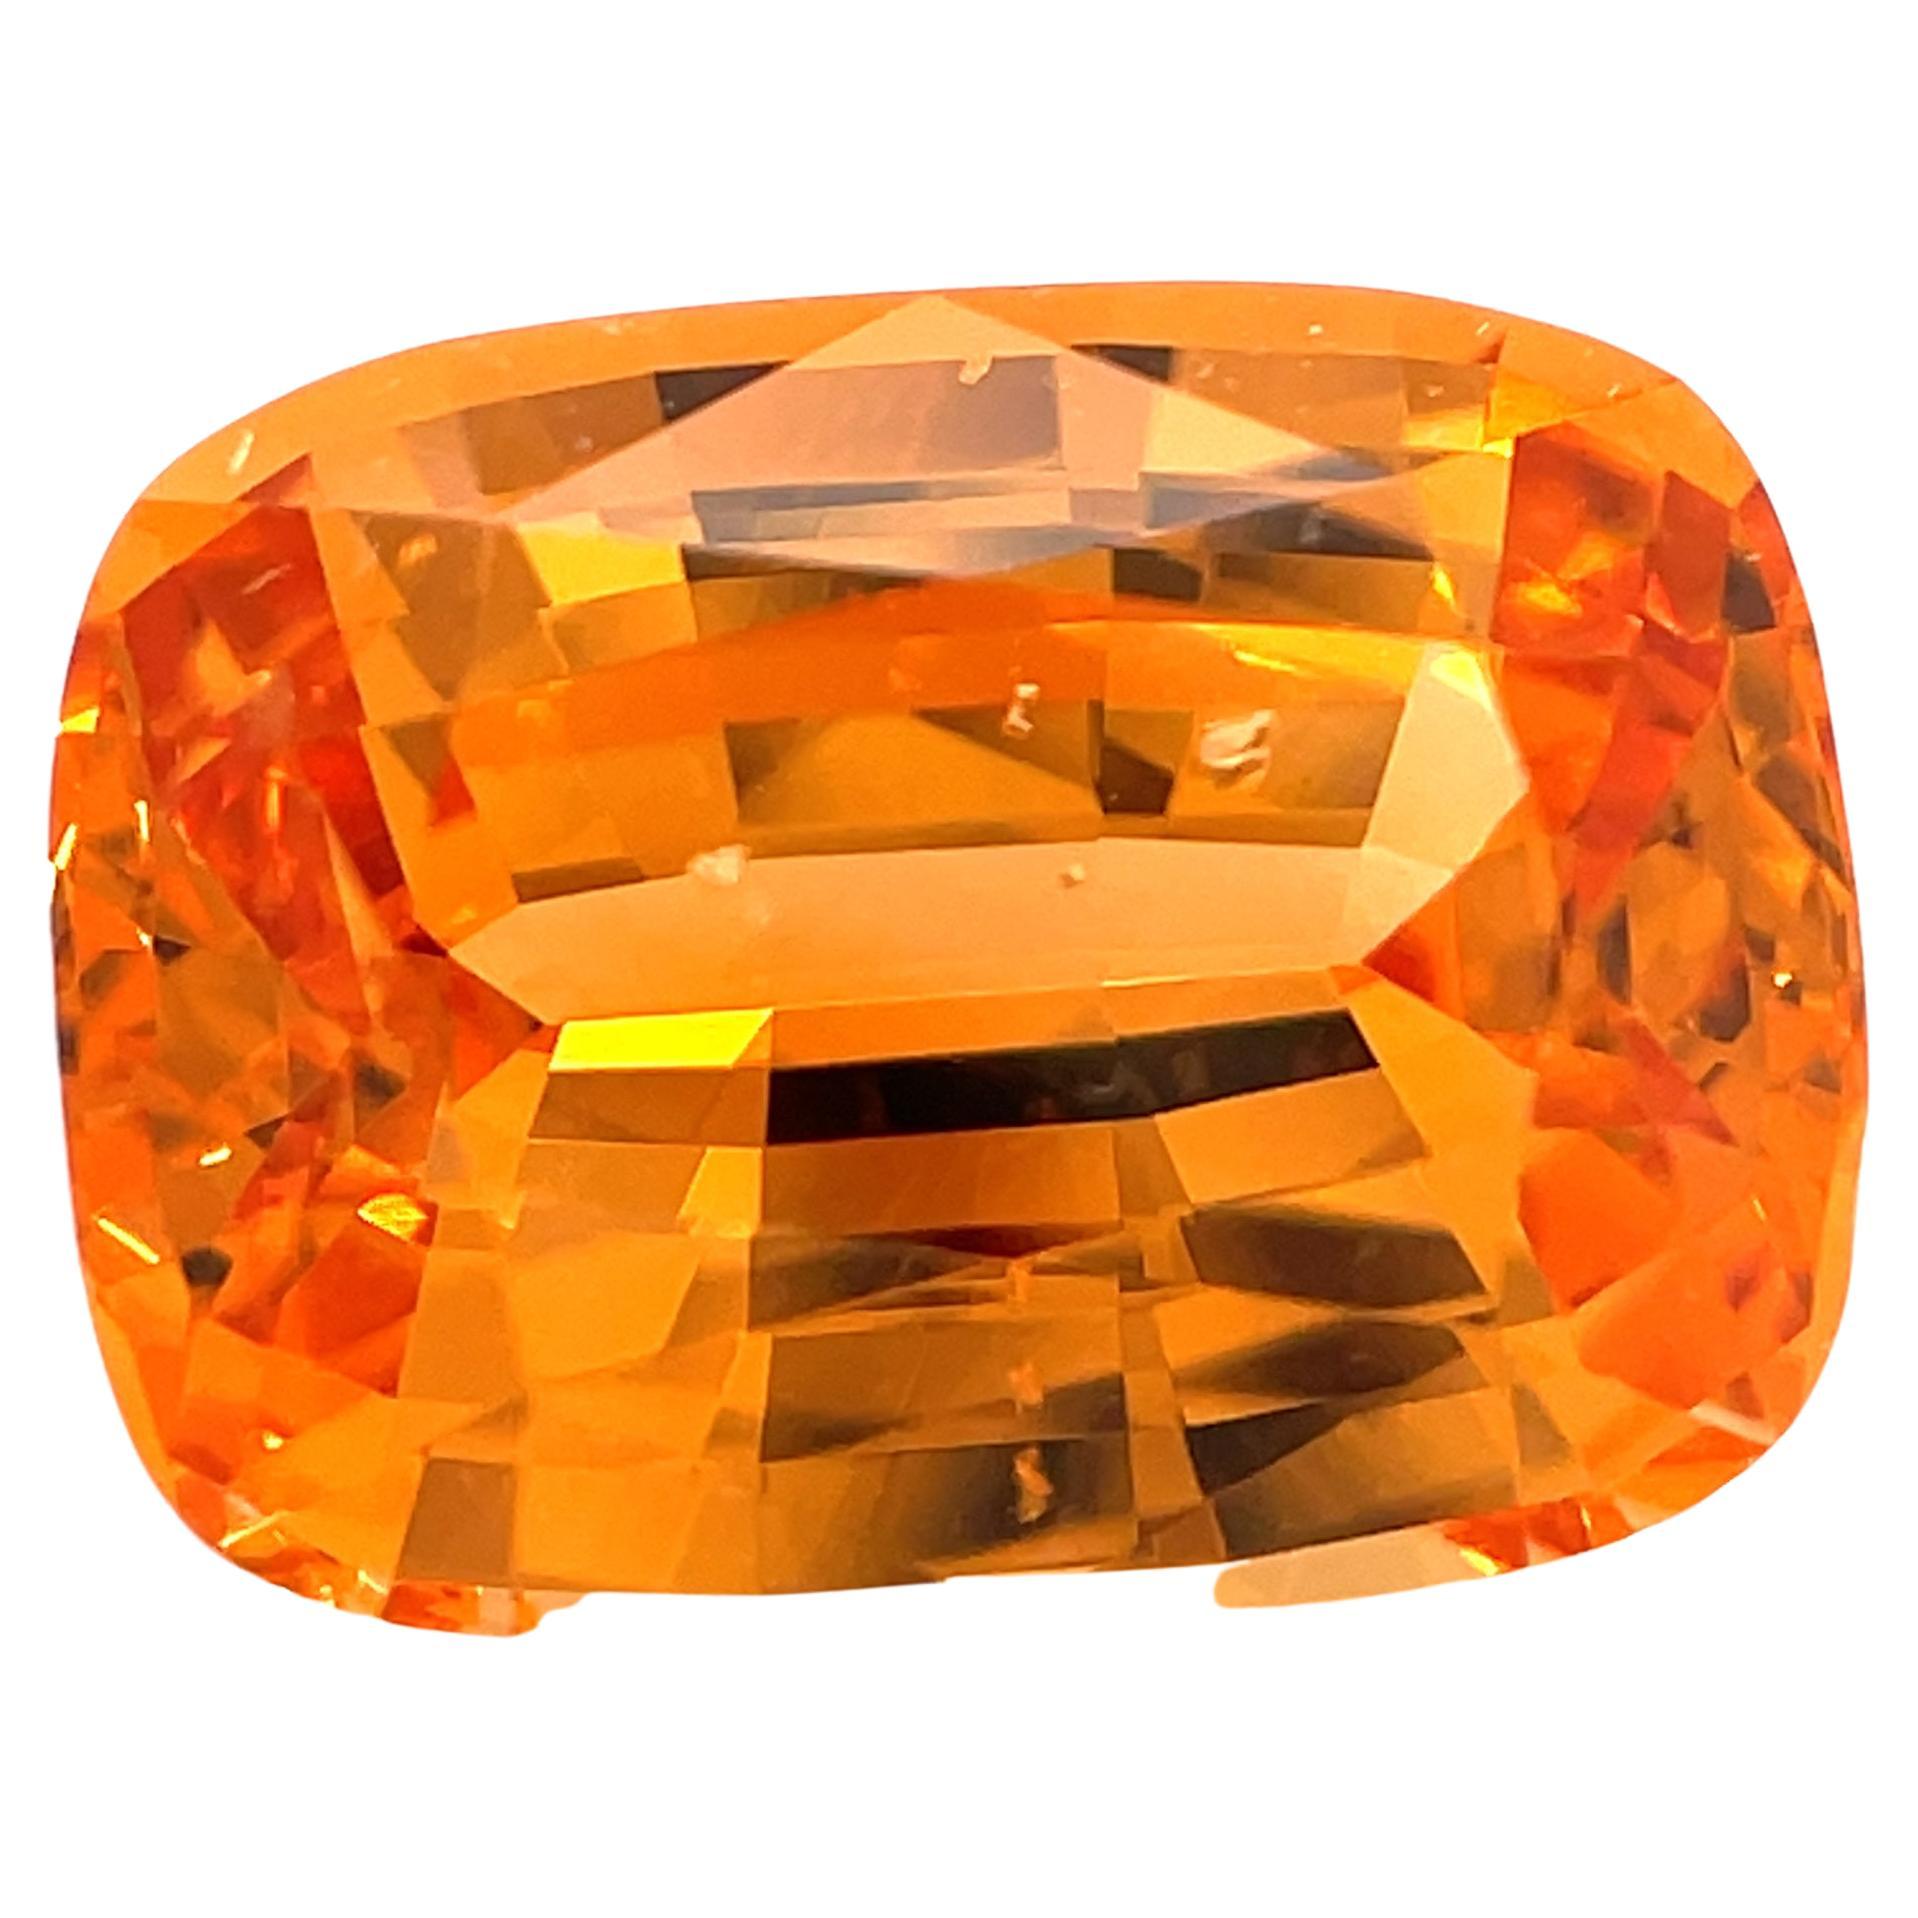 If you love the bright color of Mandarin oranges, this gemstone is for you! This brilliant, electric orange spessartite garnet is simply stunning! Weighing 4.51 carats, it is a beautifully faceted cushion cut with exceptional clarity, bursting with